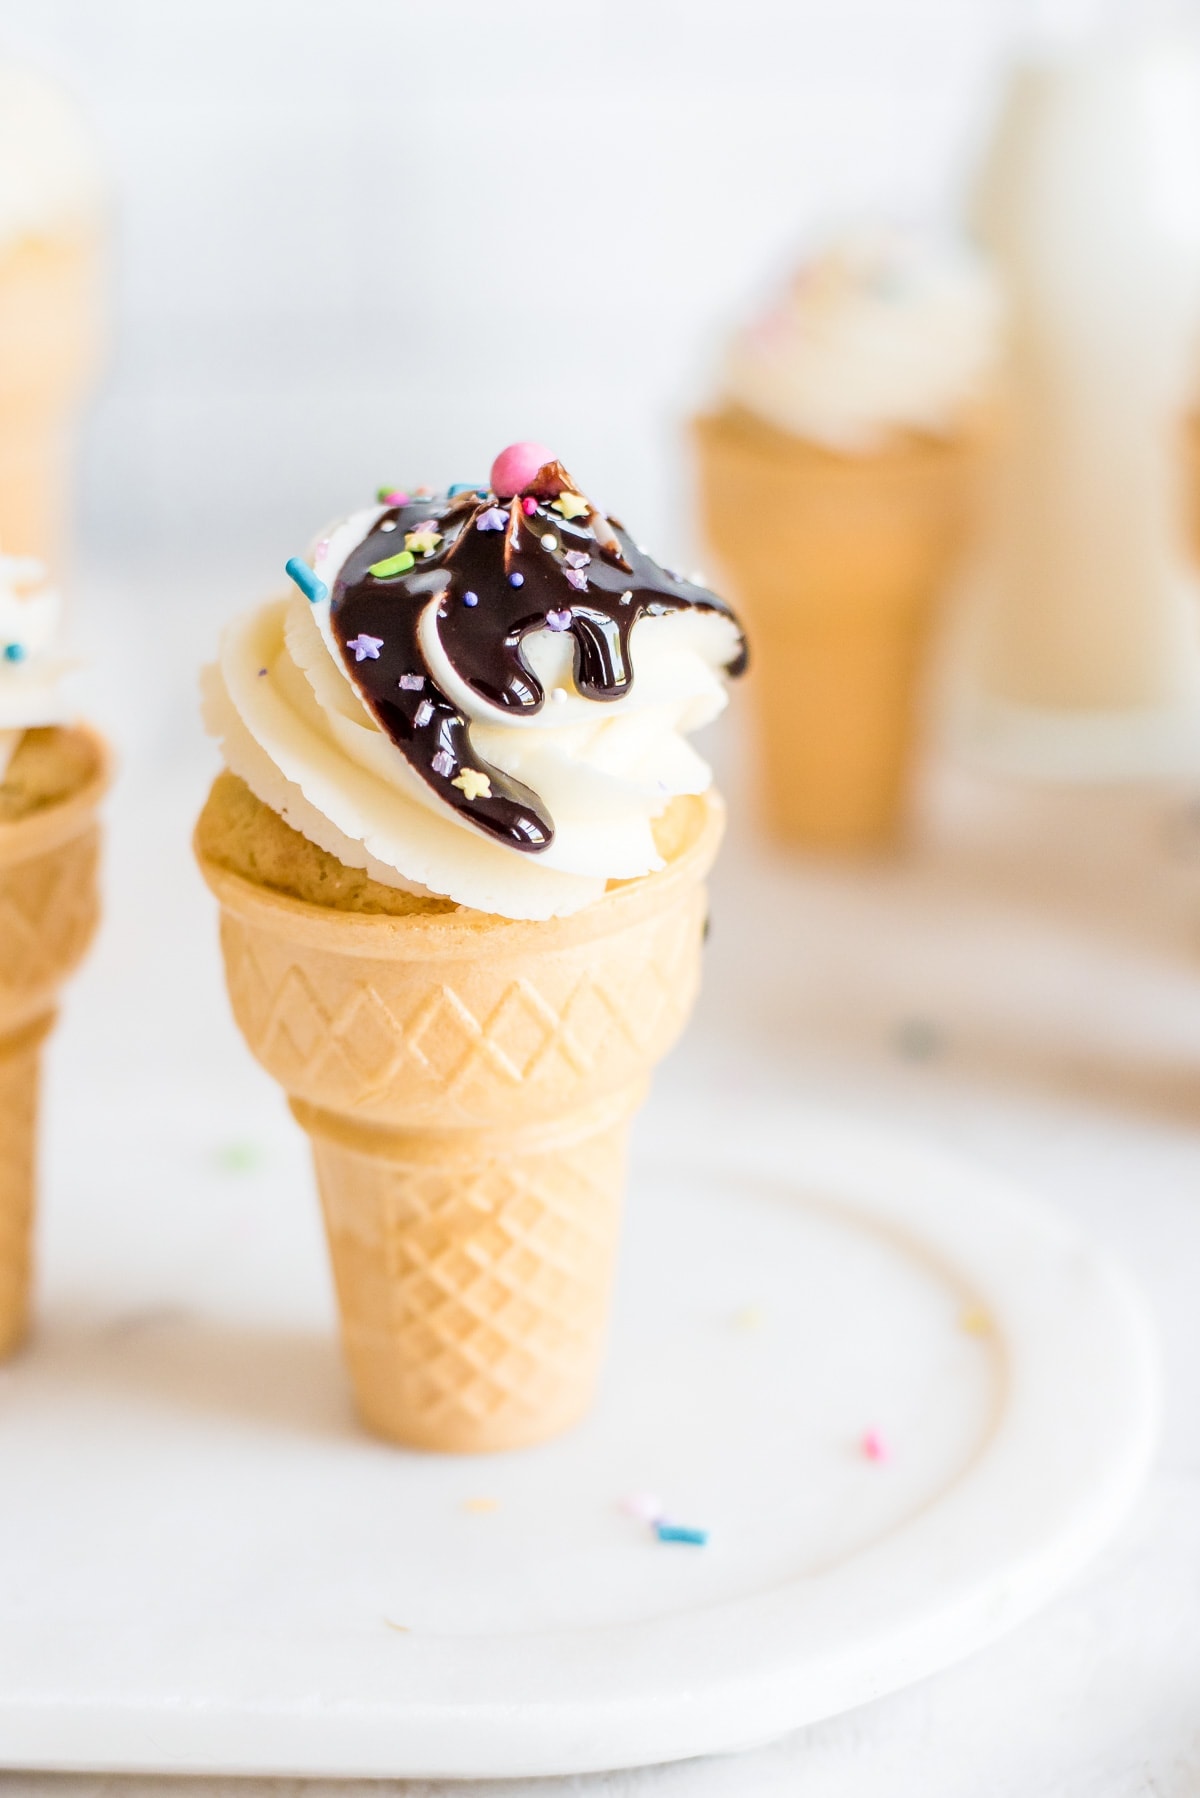 ice cream cone filled with cupcake and topped with frosting and chocolate sauce